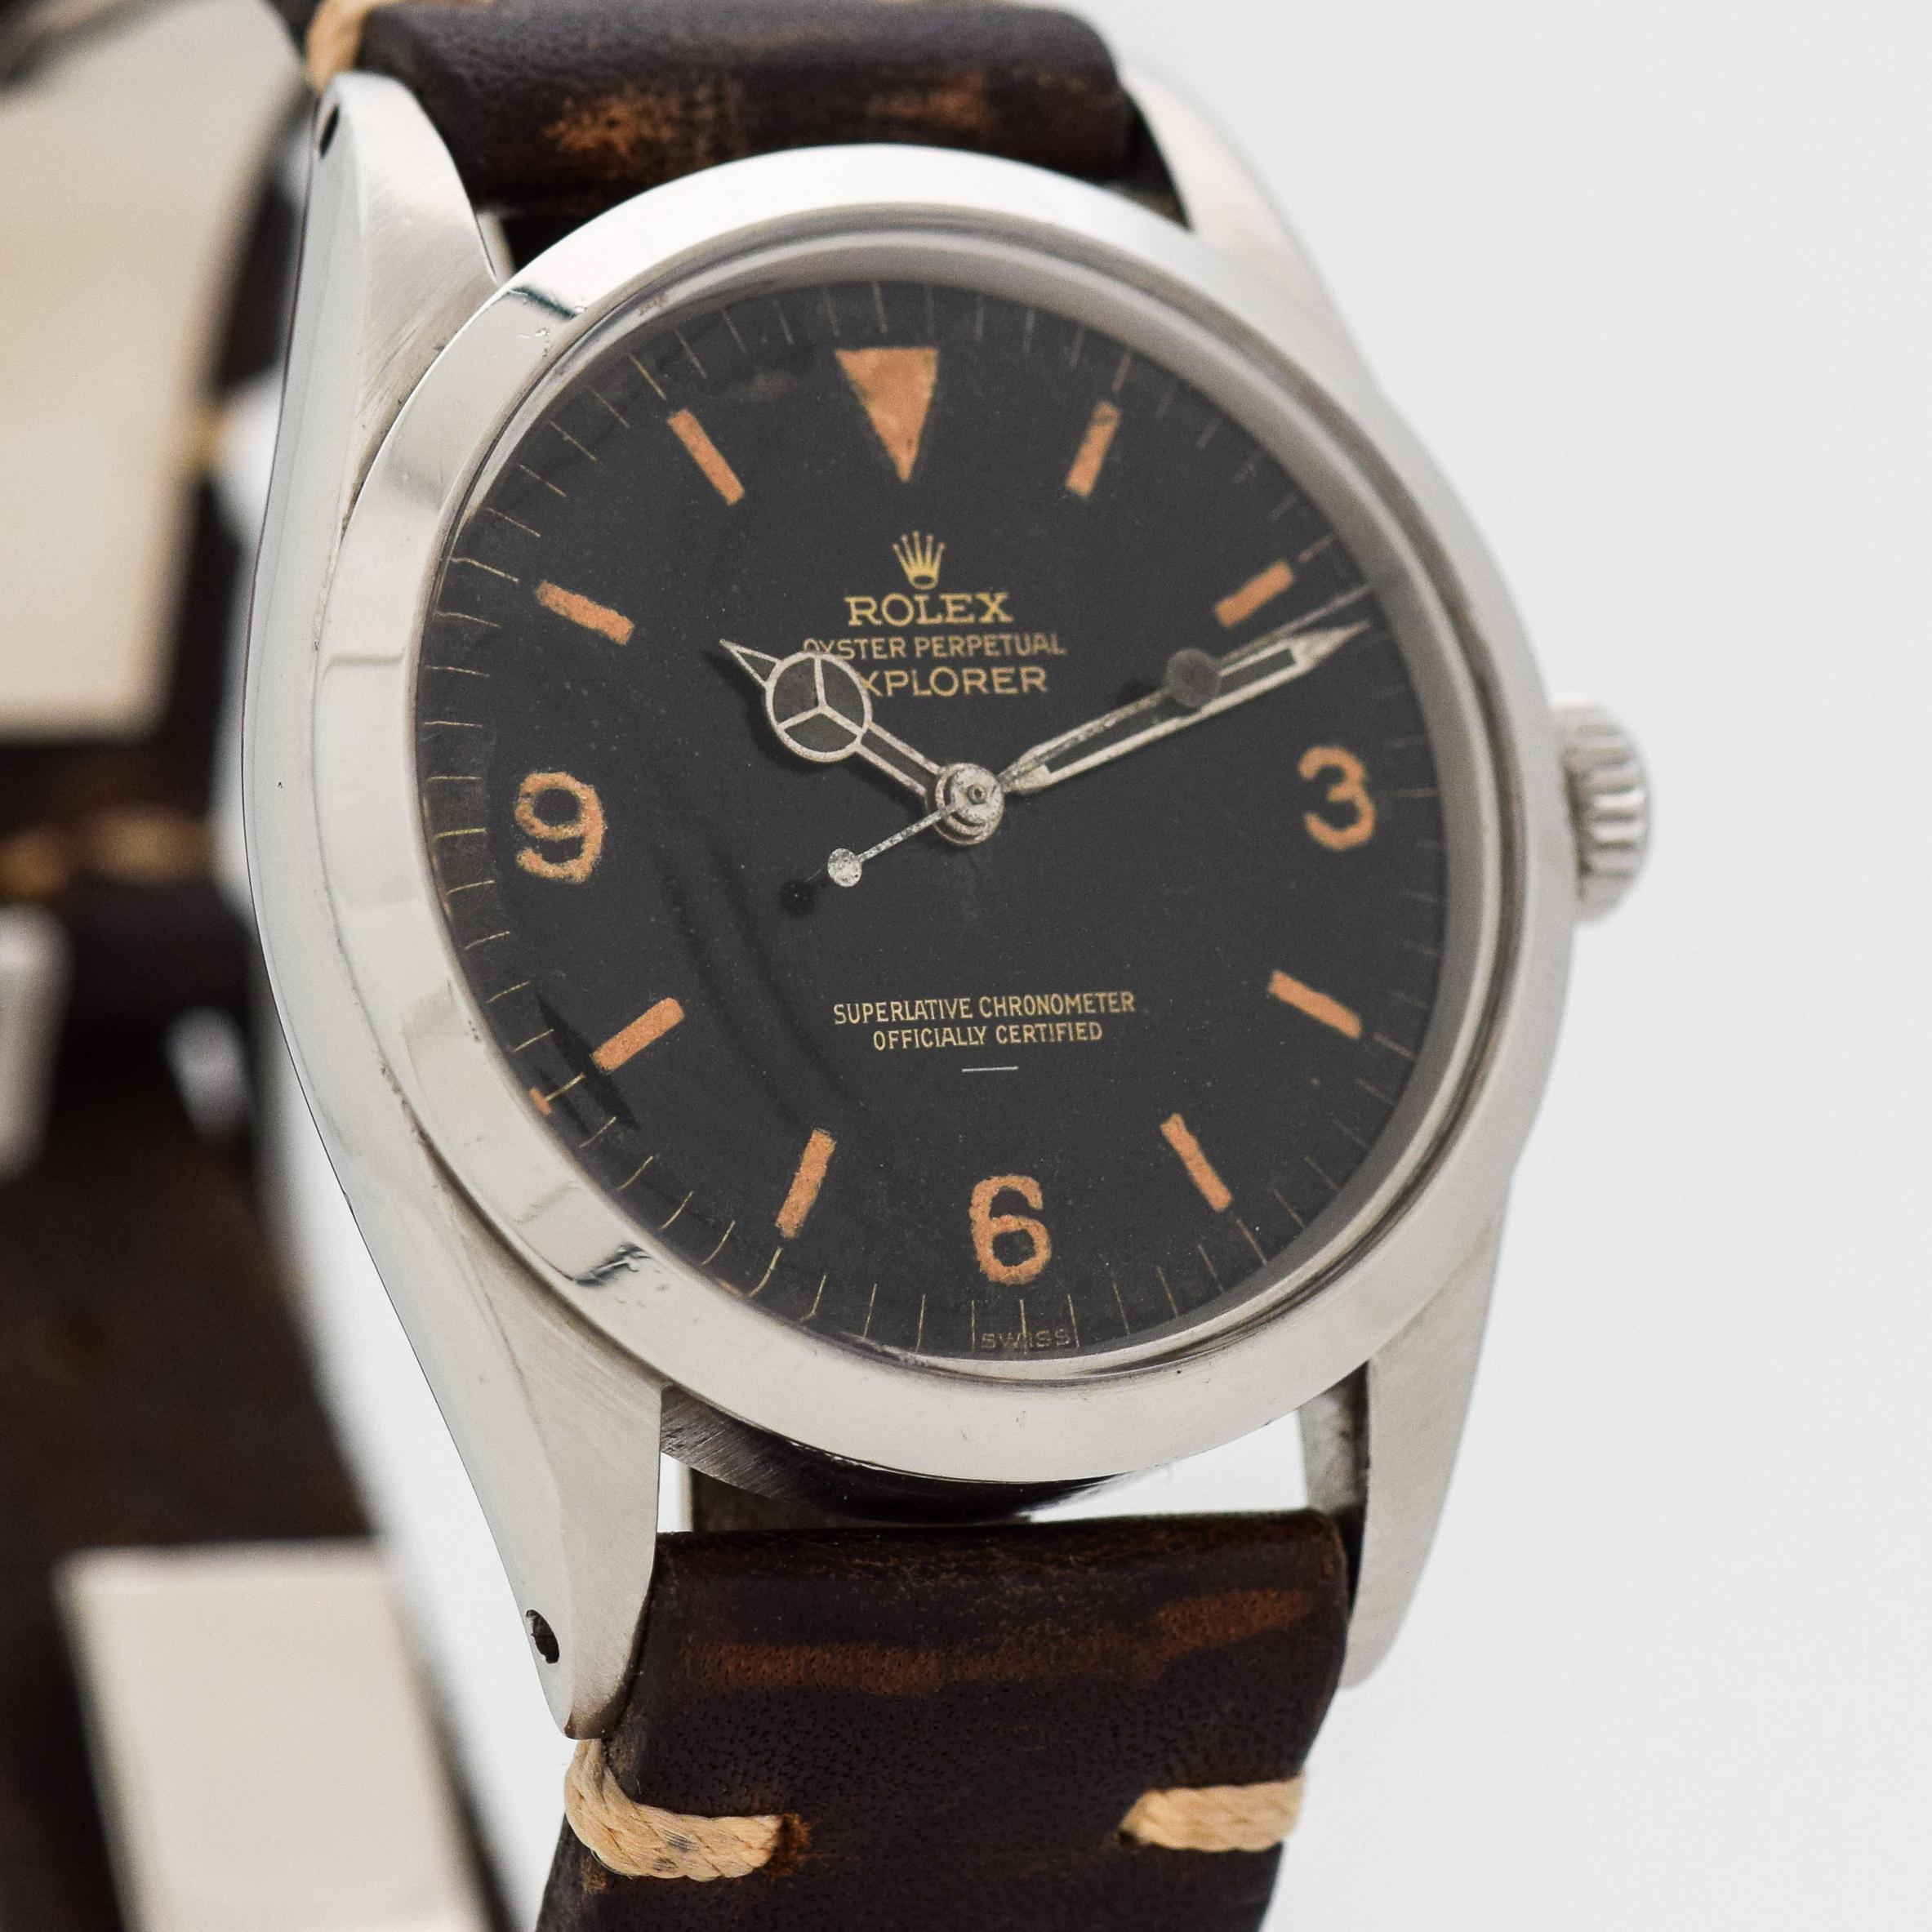 1964 Vintage Rolex Explorer Highly Collectible and Desirable Early (2nd Year) Ref. 1016 Stainless Steel watch with Original Gilt And Underlined Patina Black Dial with Luminous Arabic 3, 6, and 9 with Genuine Steel Rolex Buckle. 36mm x 43mm lug to